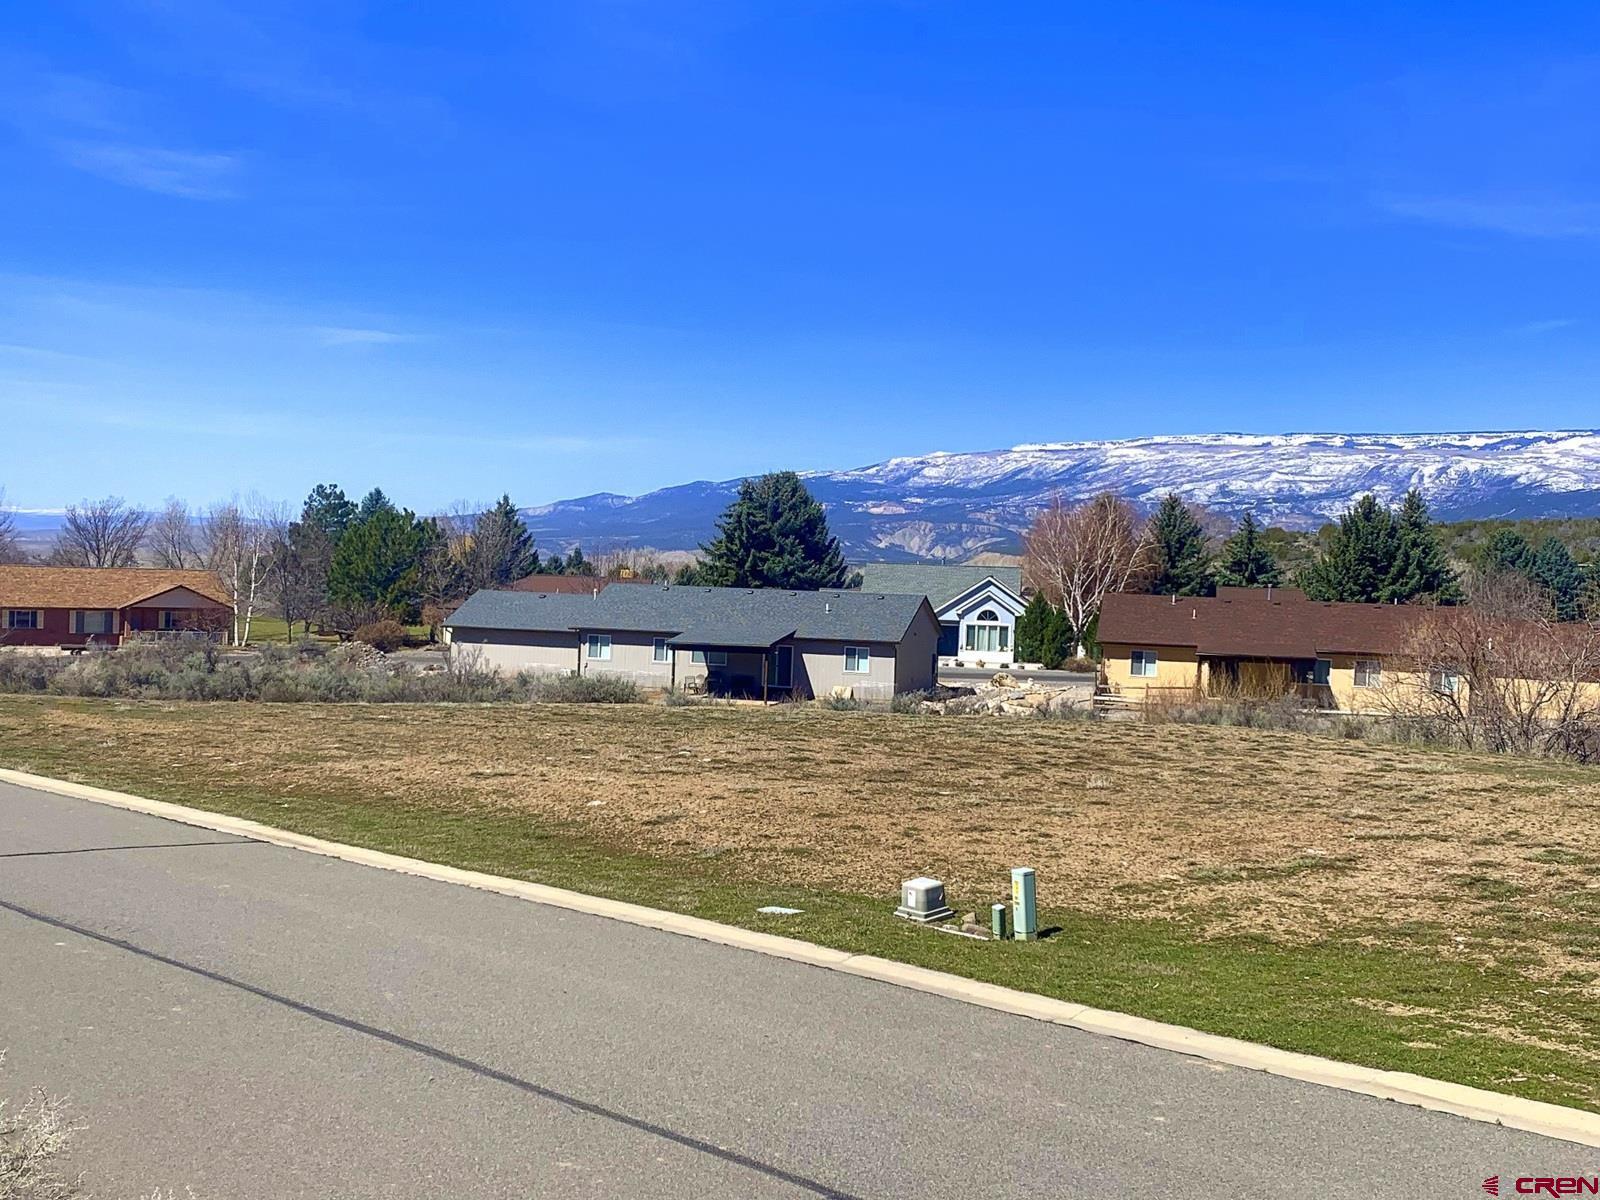 Surrounded by the beautiful Grand Mesa, this desirable lot located in Deer Creek Village is ready for your custom home!  A seasonal stream at the back of the property and an undeveloped hillside across the street allows for enjoyment of nature.  Nearly a half acre lot with good grade for your building site.  Electricity and fiber optic cable are near lot line, with water and sewer taps available.  Walking distance to Cedaredge Golf Club and Bunker's Bar and Grill.  Conveniently located to the town's amenities, including Surface Creek walking trail, grocery store, gas station, restaurants and downtown shops, as well as Grand Mesa Arts and Events Center, plus year-round recreation on Grand Mesa.  It's easy to fall in love with this area.  Come on home!